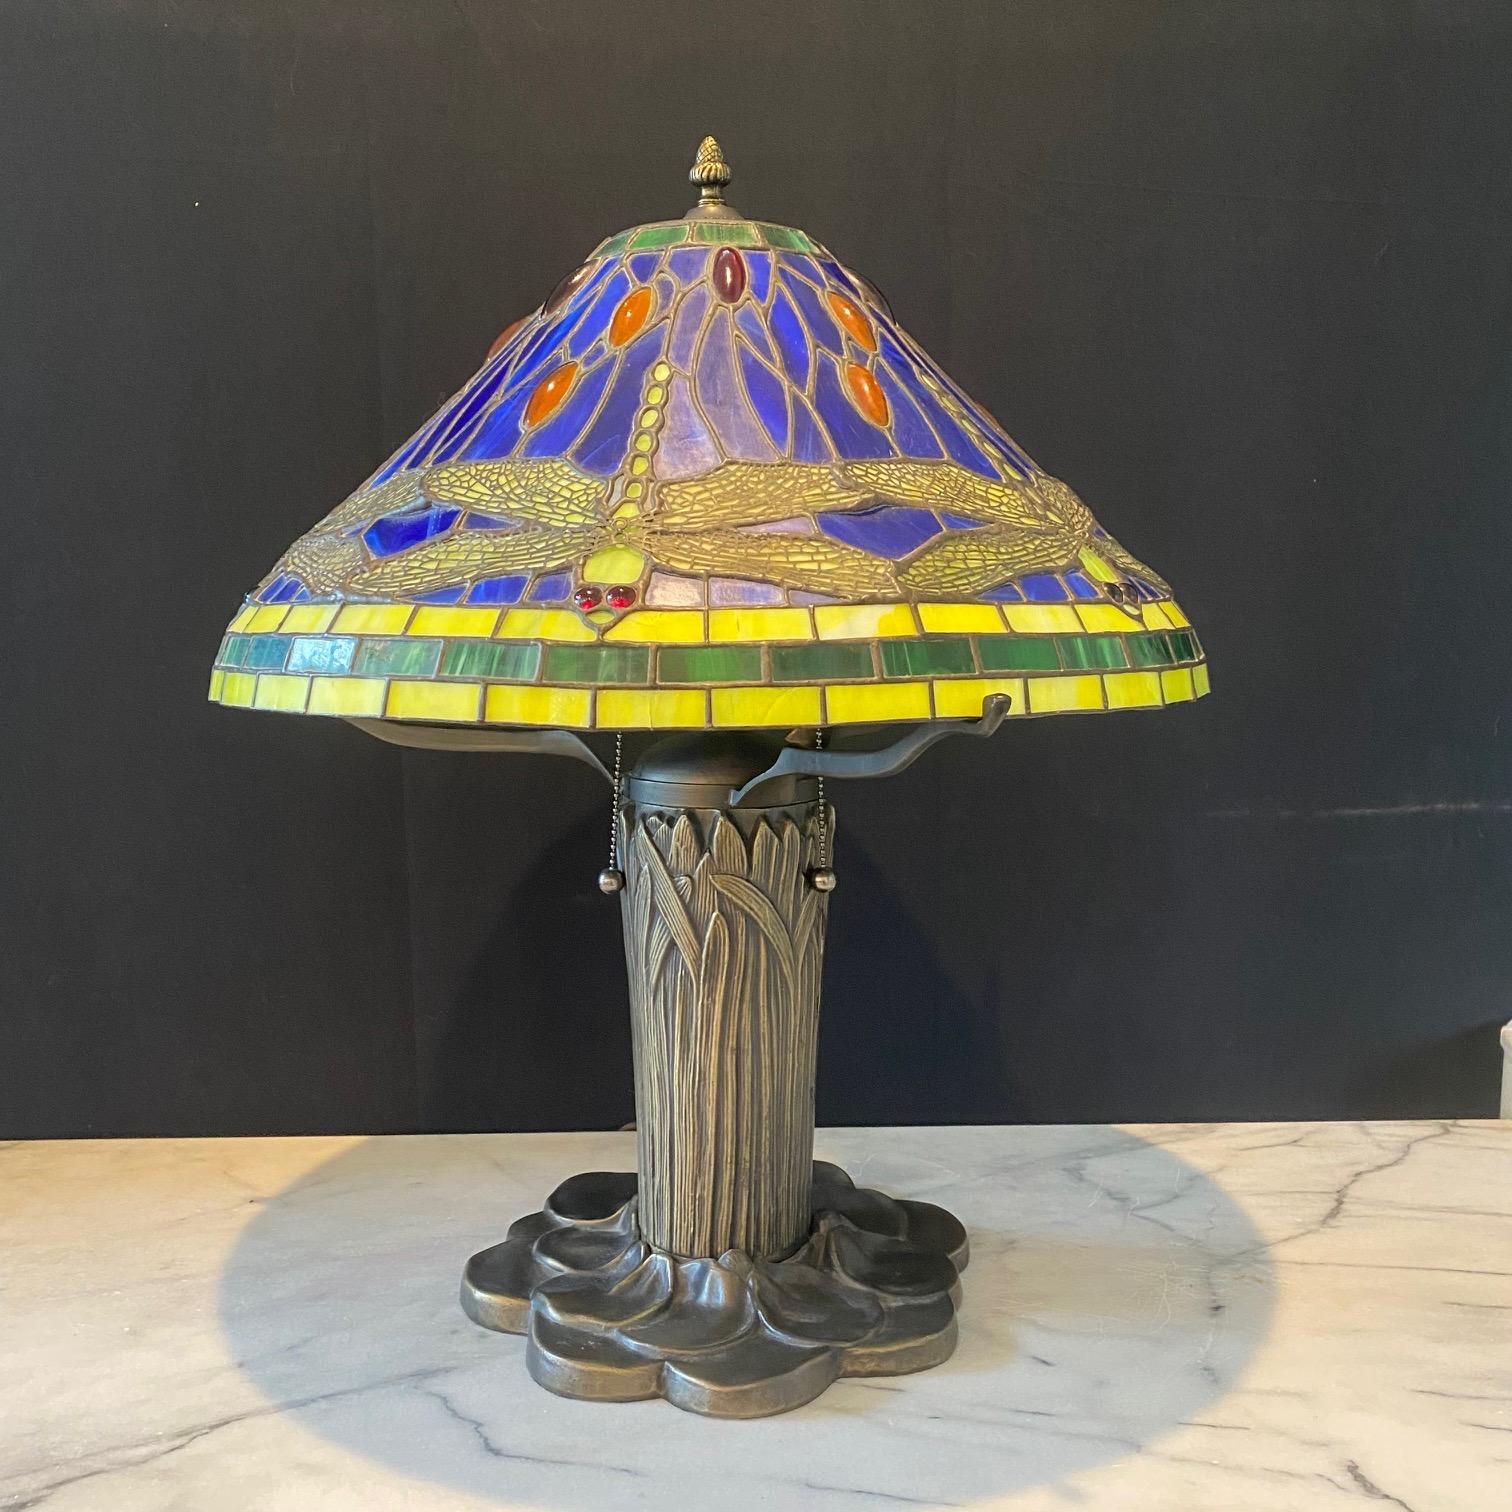  Art Nouveau Tiffany style table lamp with dragonfly design leaded glass shade with stained glass panels and bronze cattail base. A beautiful stained glass table lamp with its base in the shape of a lily pad and cattail sheaths, with a shade over